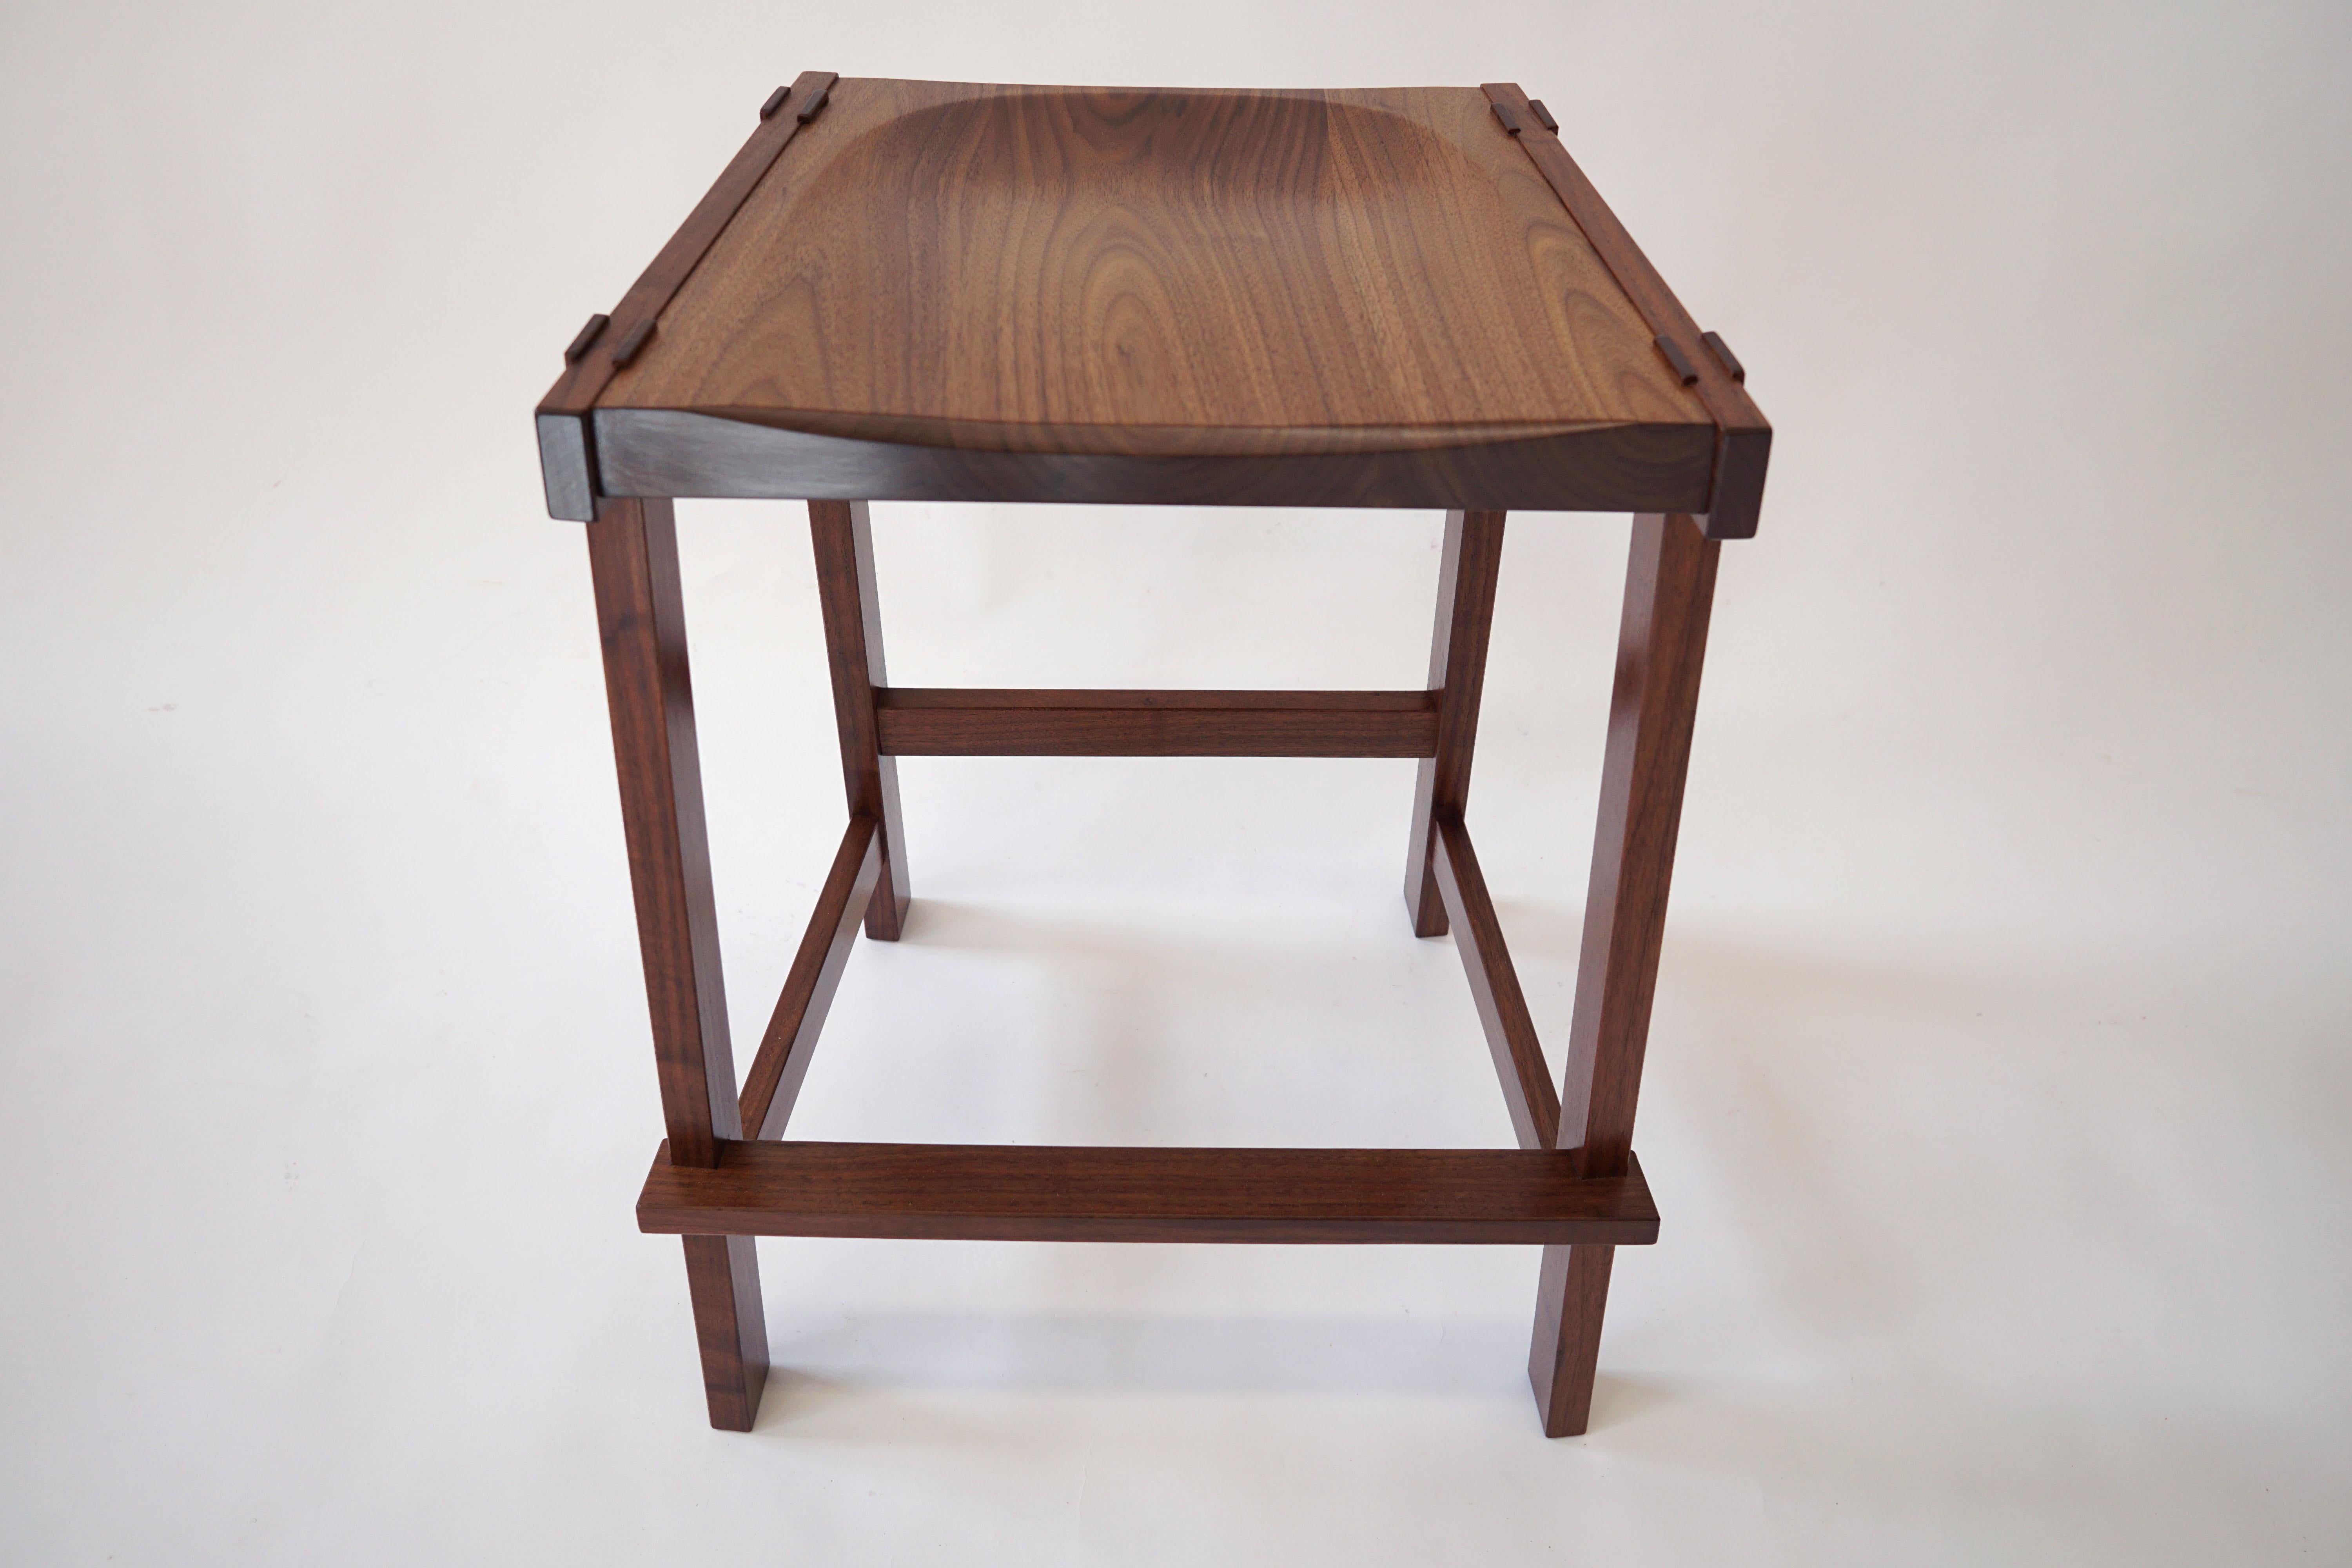 Montrose Stool in Walnut, Exposed Joinery with a Hand Carved Seat In New Condition For Sale In Southampton, MA